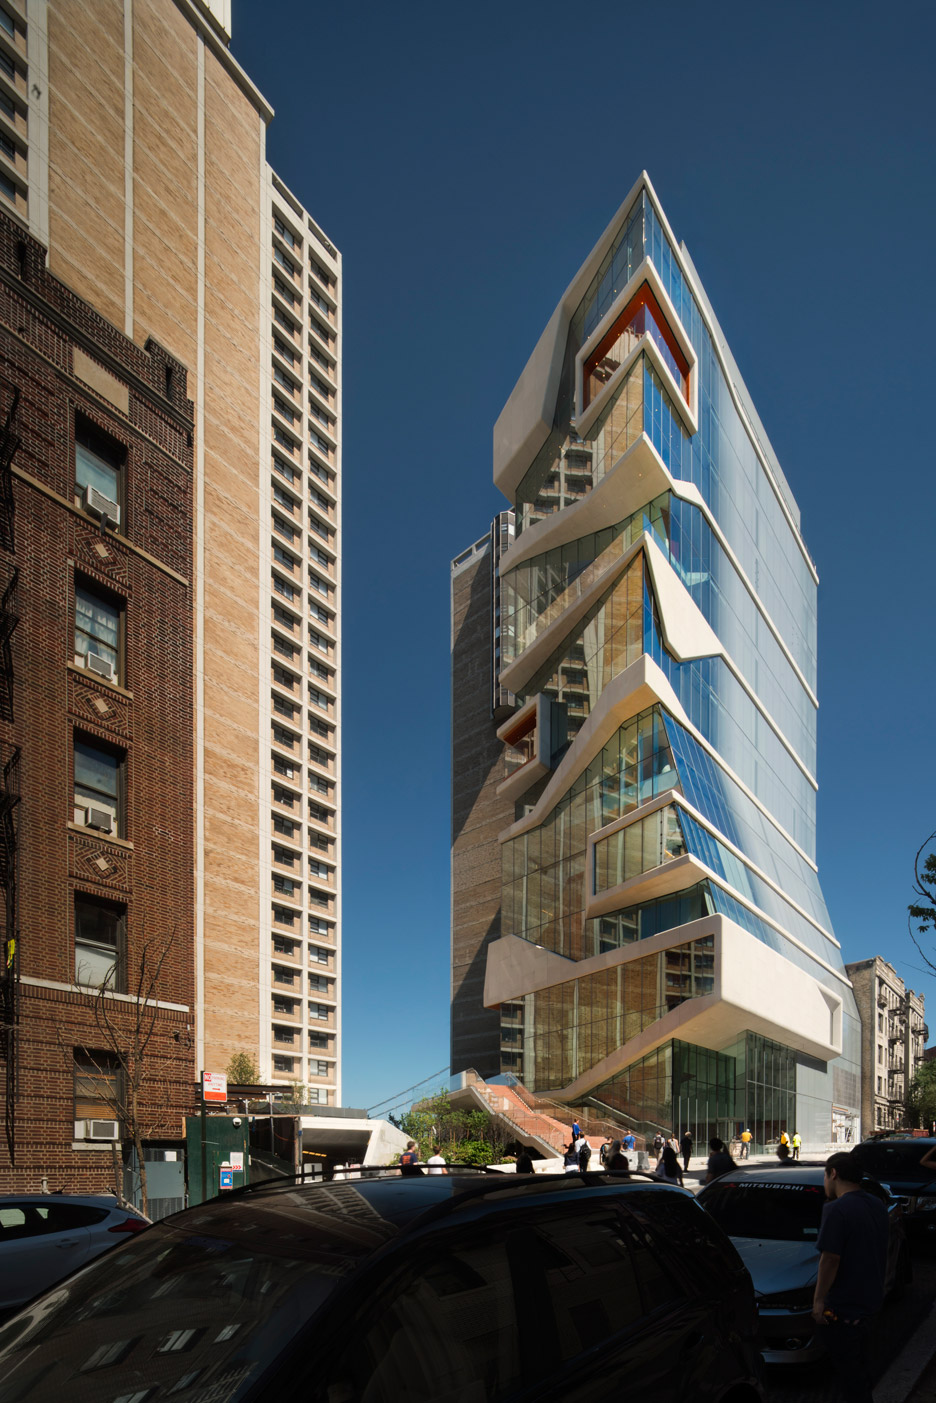 The Vagelos educational building by DS + R